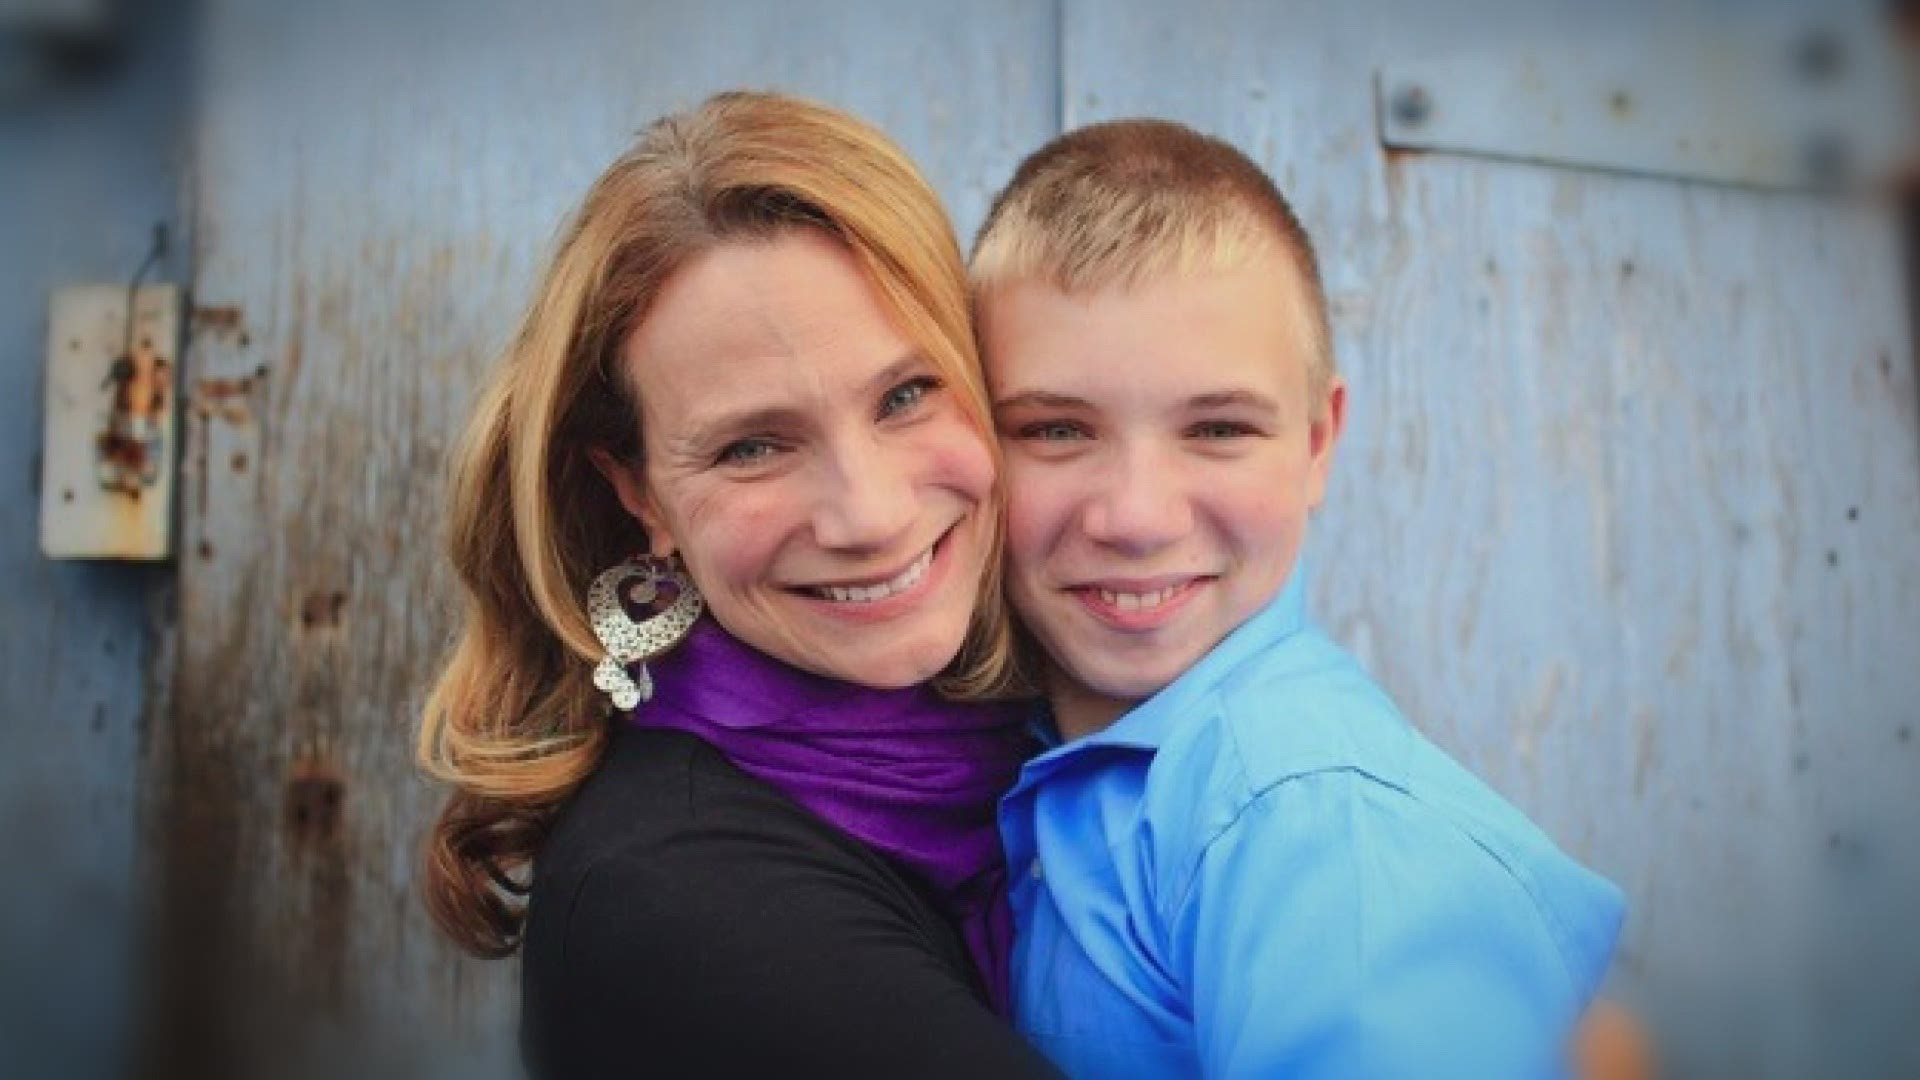 Inspired by her son, she is creating books and cards for people with special needs